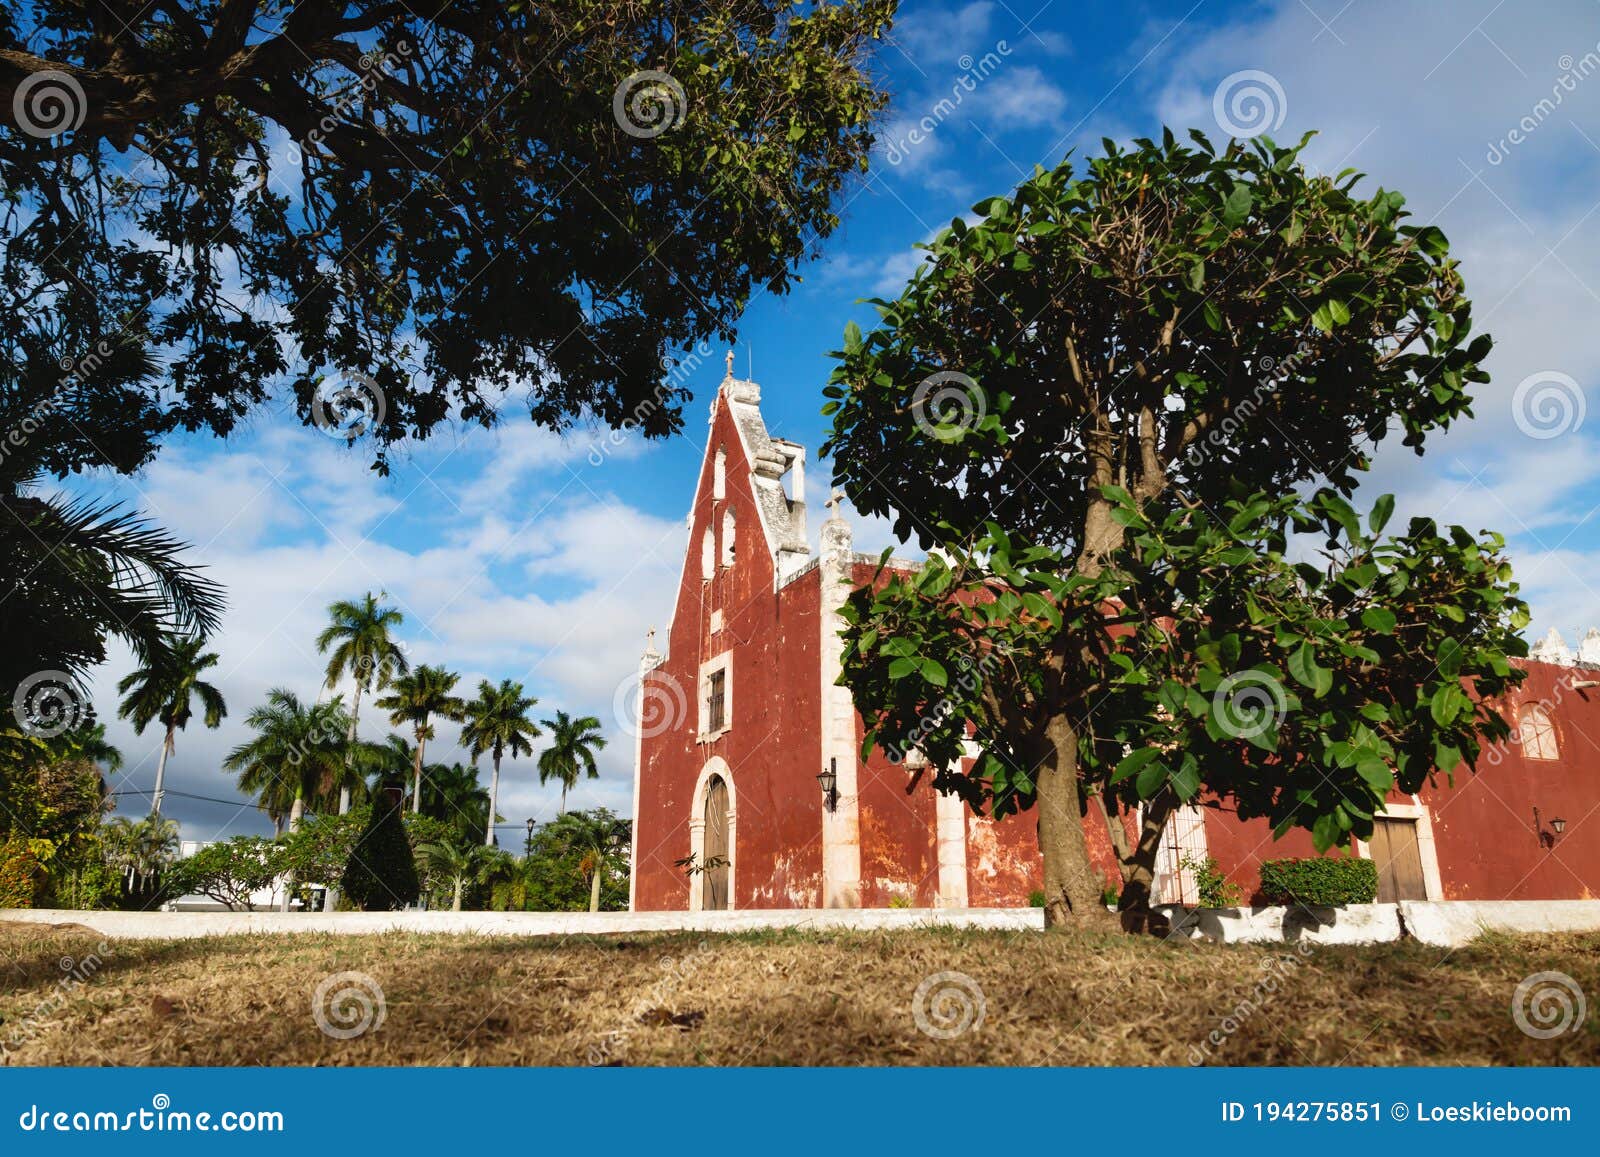 red colonial church itzimna in a park framed by trees, merida, yucatan, mexico